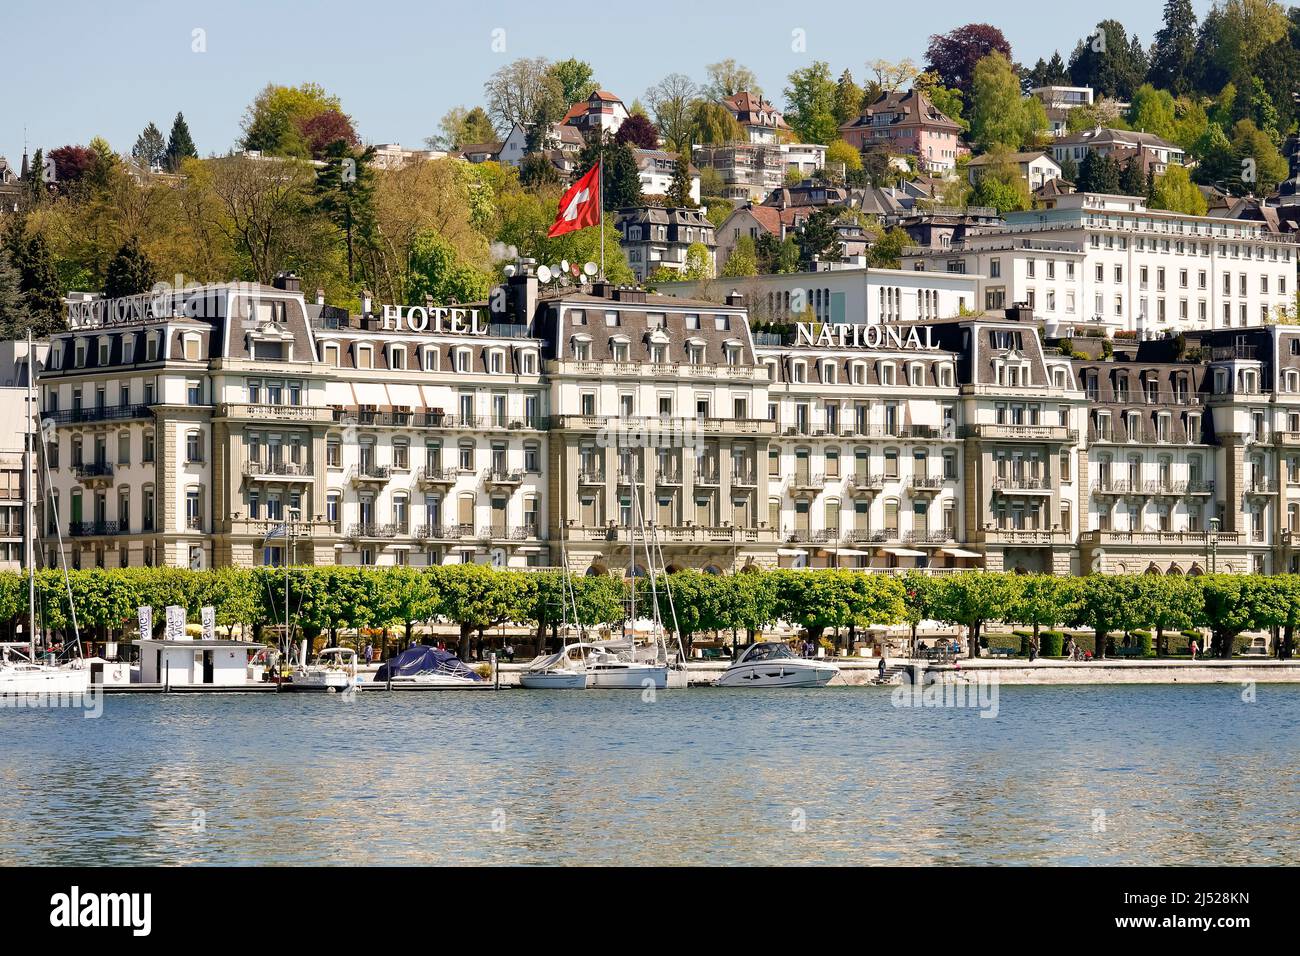 Lucerne, Switzerland - May 05, 2016: The Grand Hotel National front facade overlooks the lakeside promenade along Nationalquai, the hotel was opened i Stock Photo